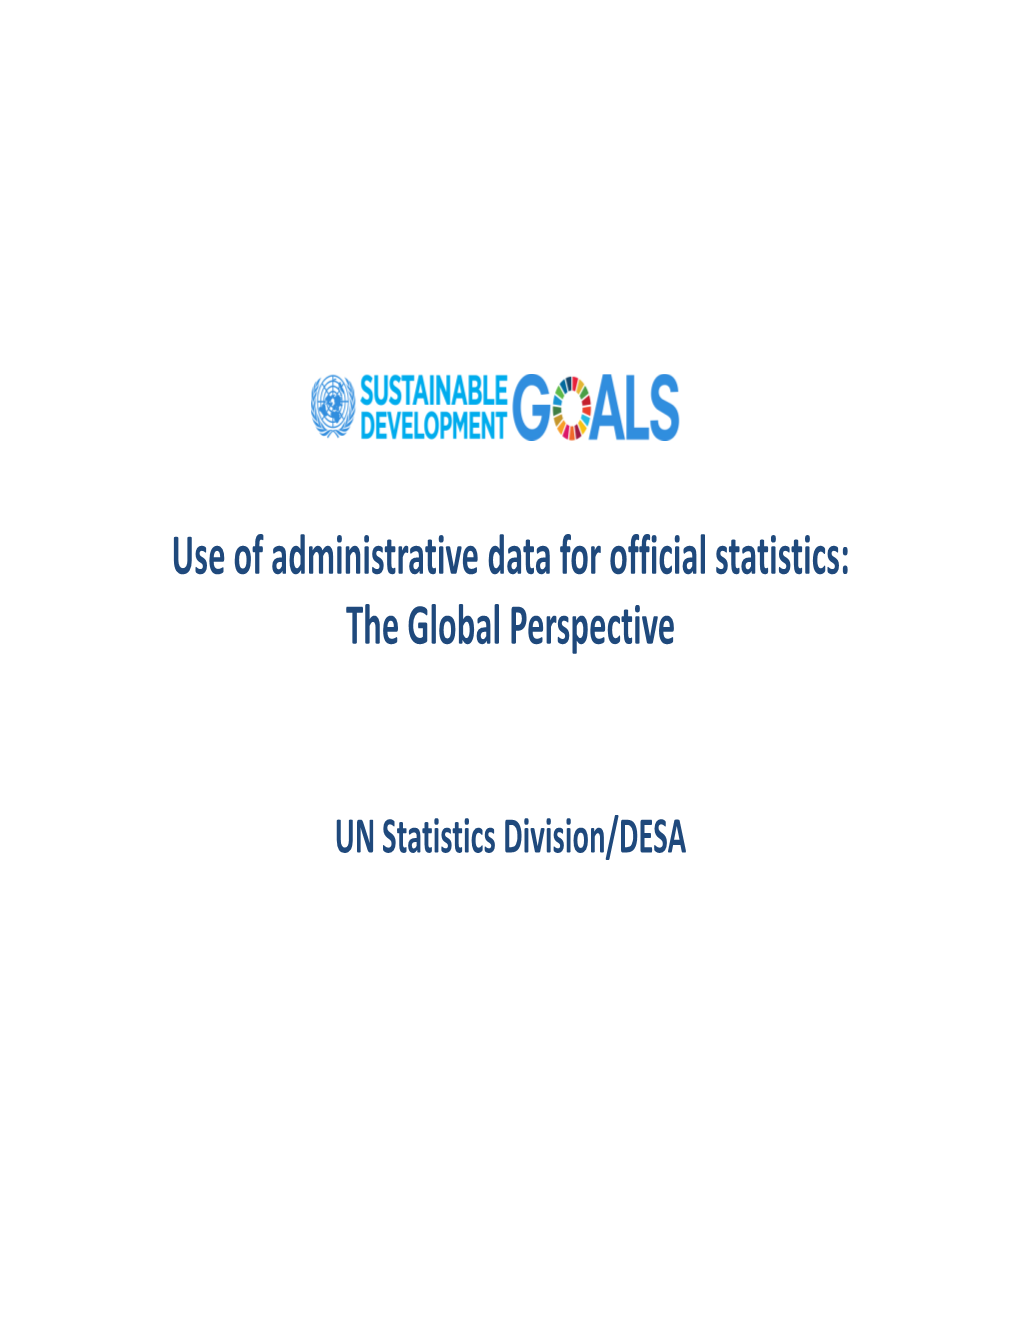 Use of Administrative Data for Official Statistics: the Global Perspective